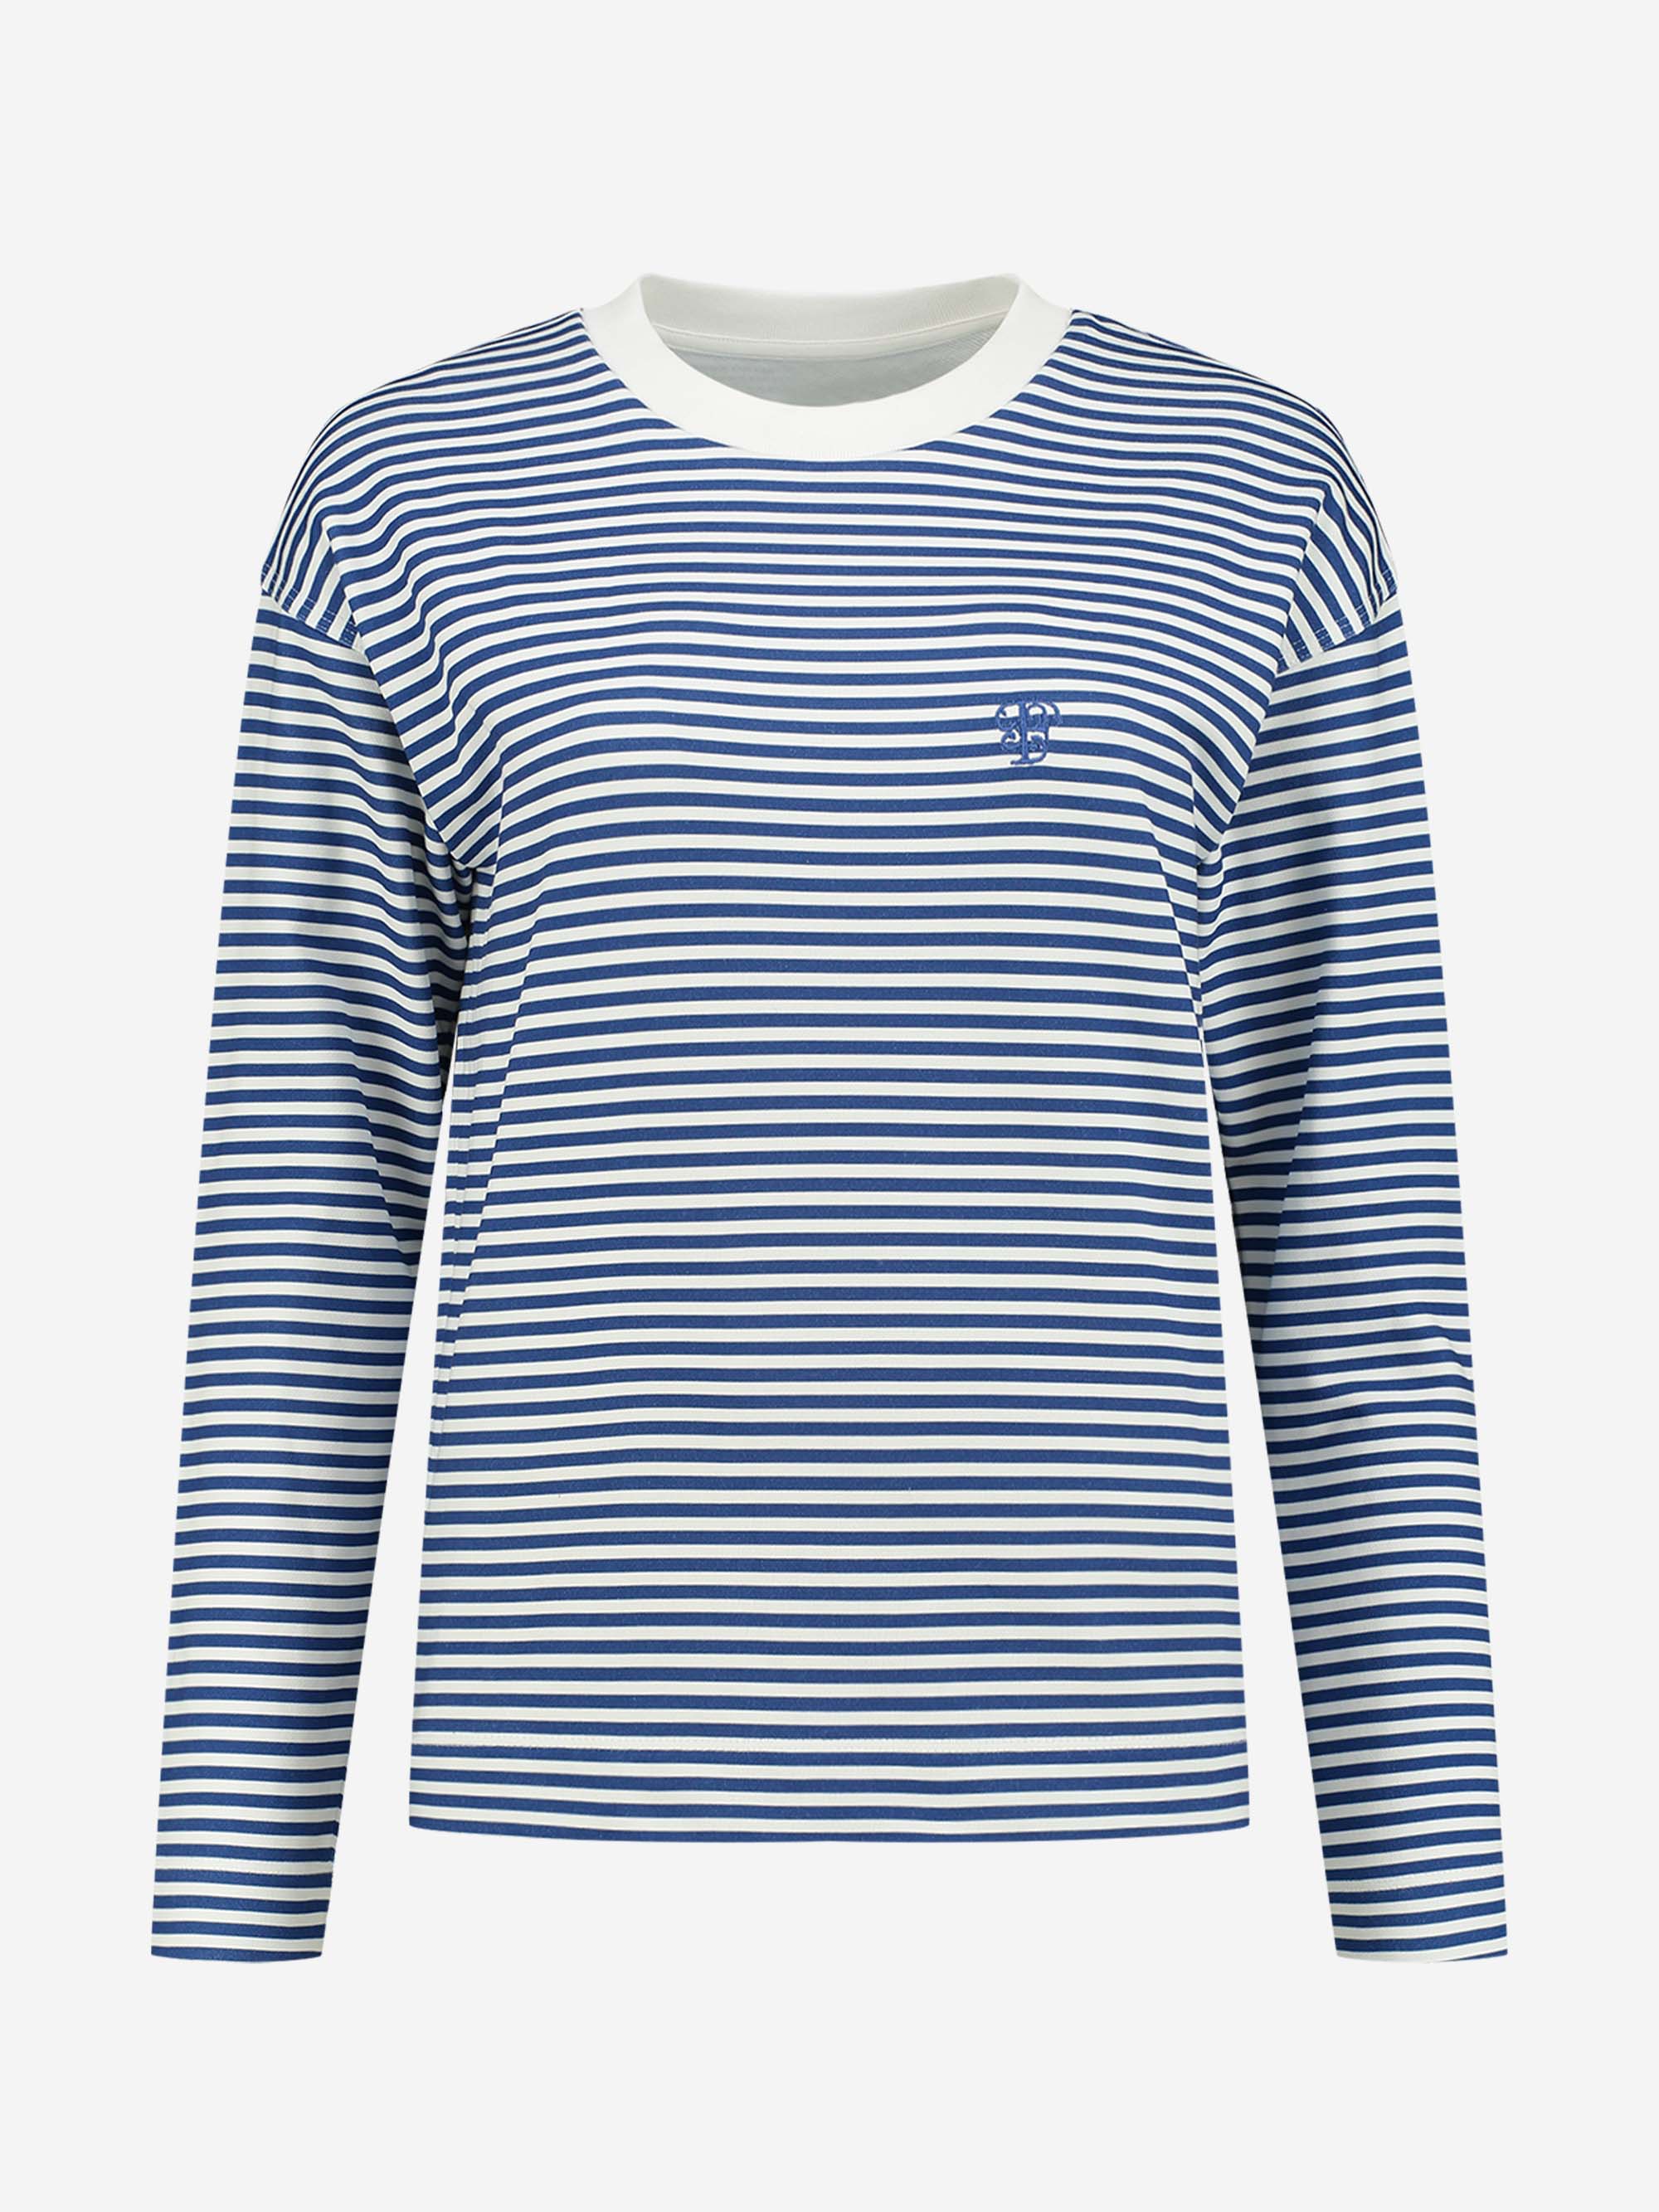  Striped long sleeve top